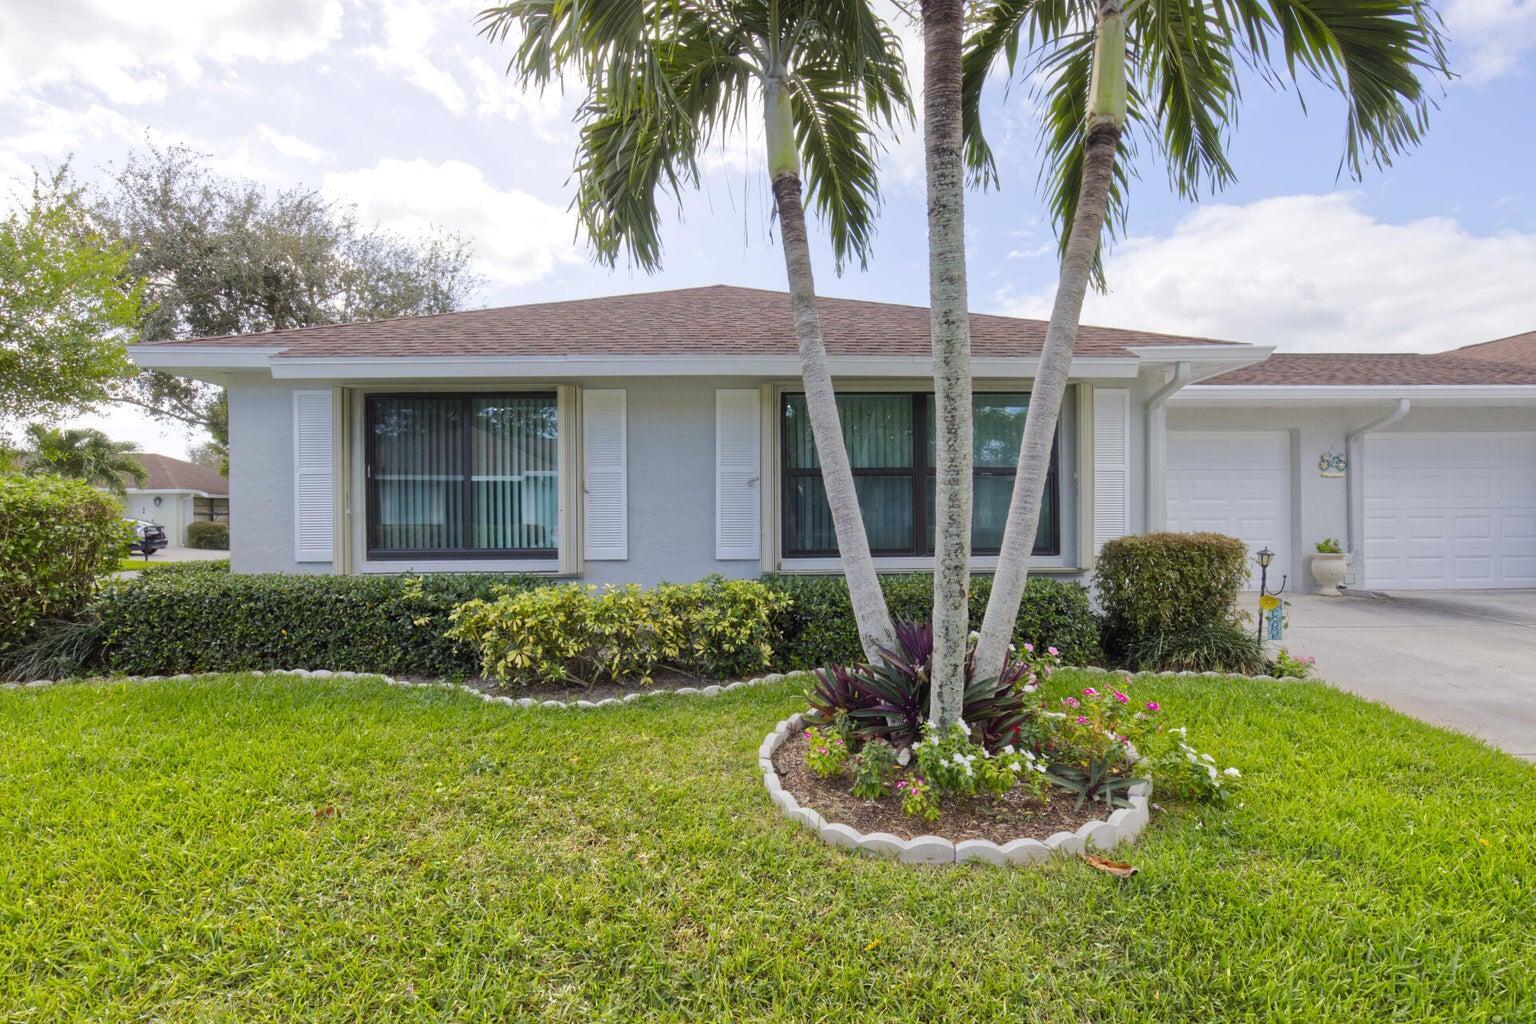 Completely updated and meticulously maintained corner villa at Bent Tree Villas East. Updated kitchen and baths; stainless steel  appliances, beautiful enclosed Florida sunroom with impact glass doors. Oversize rear patio with pavers recently installed. Newer windows throughout. Water heater installed 2022; All kitchen appliances were replaced 2022. Full-size washer and dryer. HVAC system 2019. Community amenities include clubhouse with library, billiard room and large community pool. HOA dues cover roof, building insurance, water, lawn care, and basic cable. HOA requires 15% minimum down payment when purchasing.